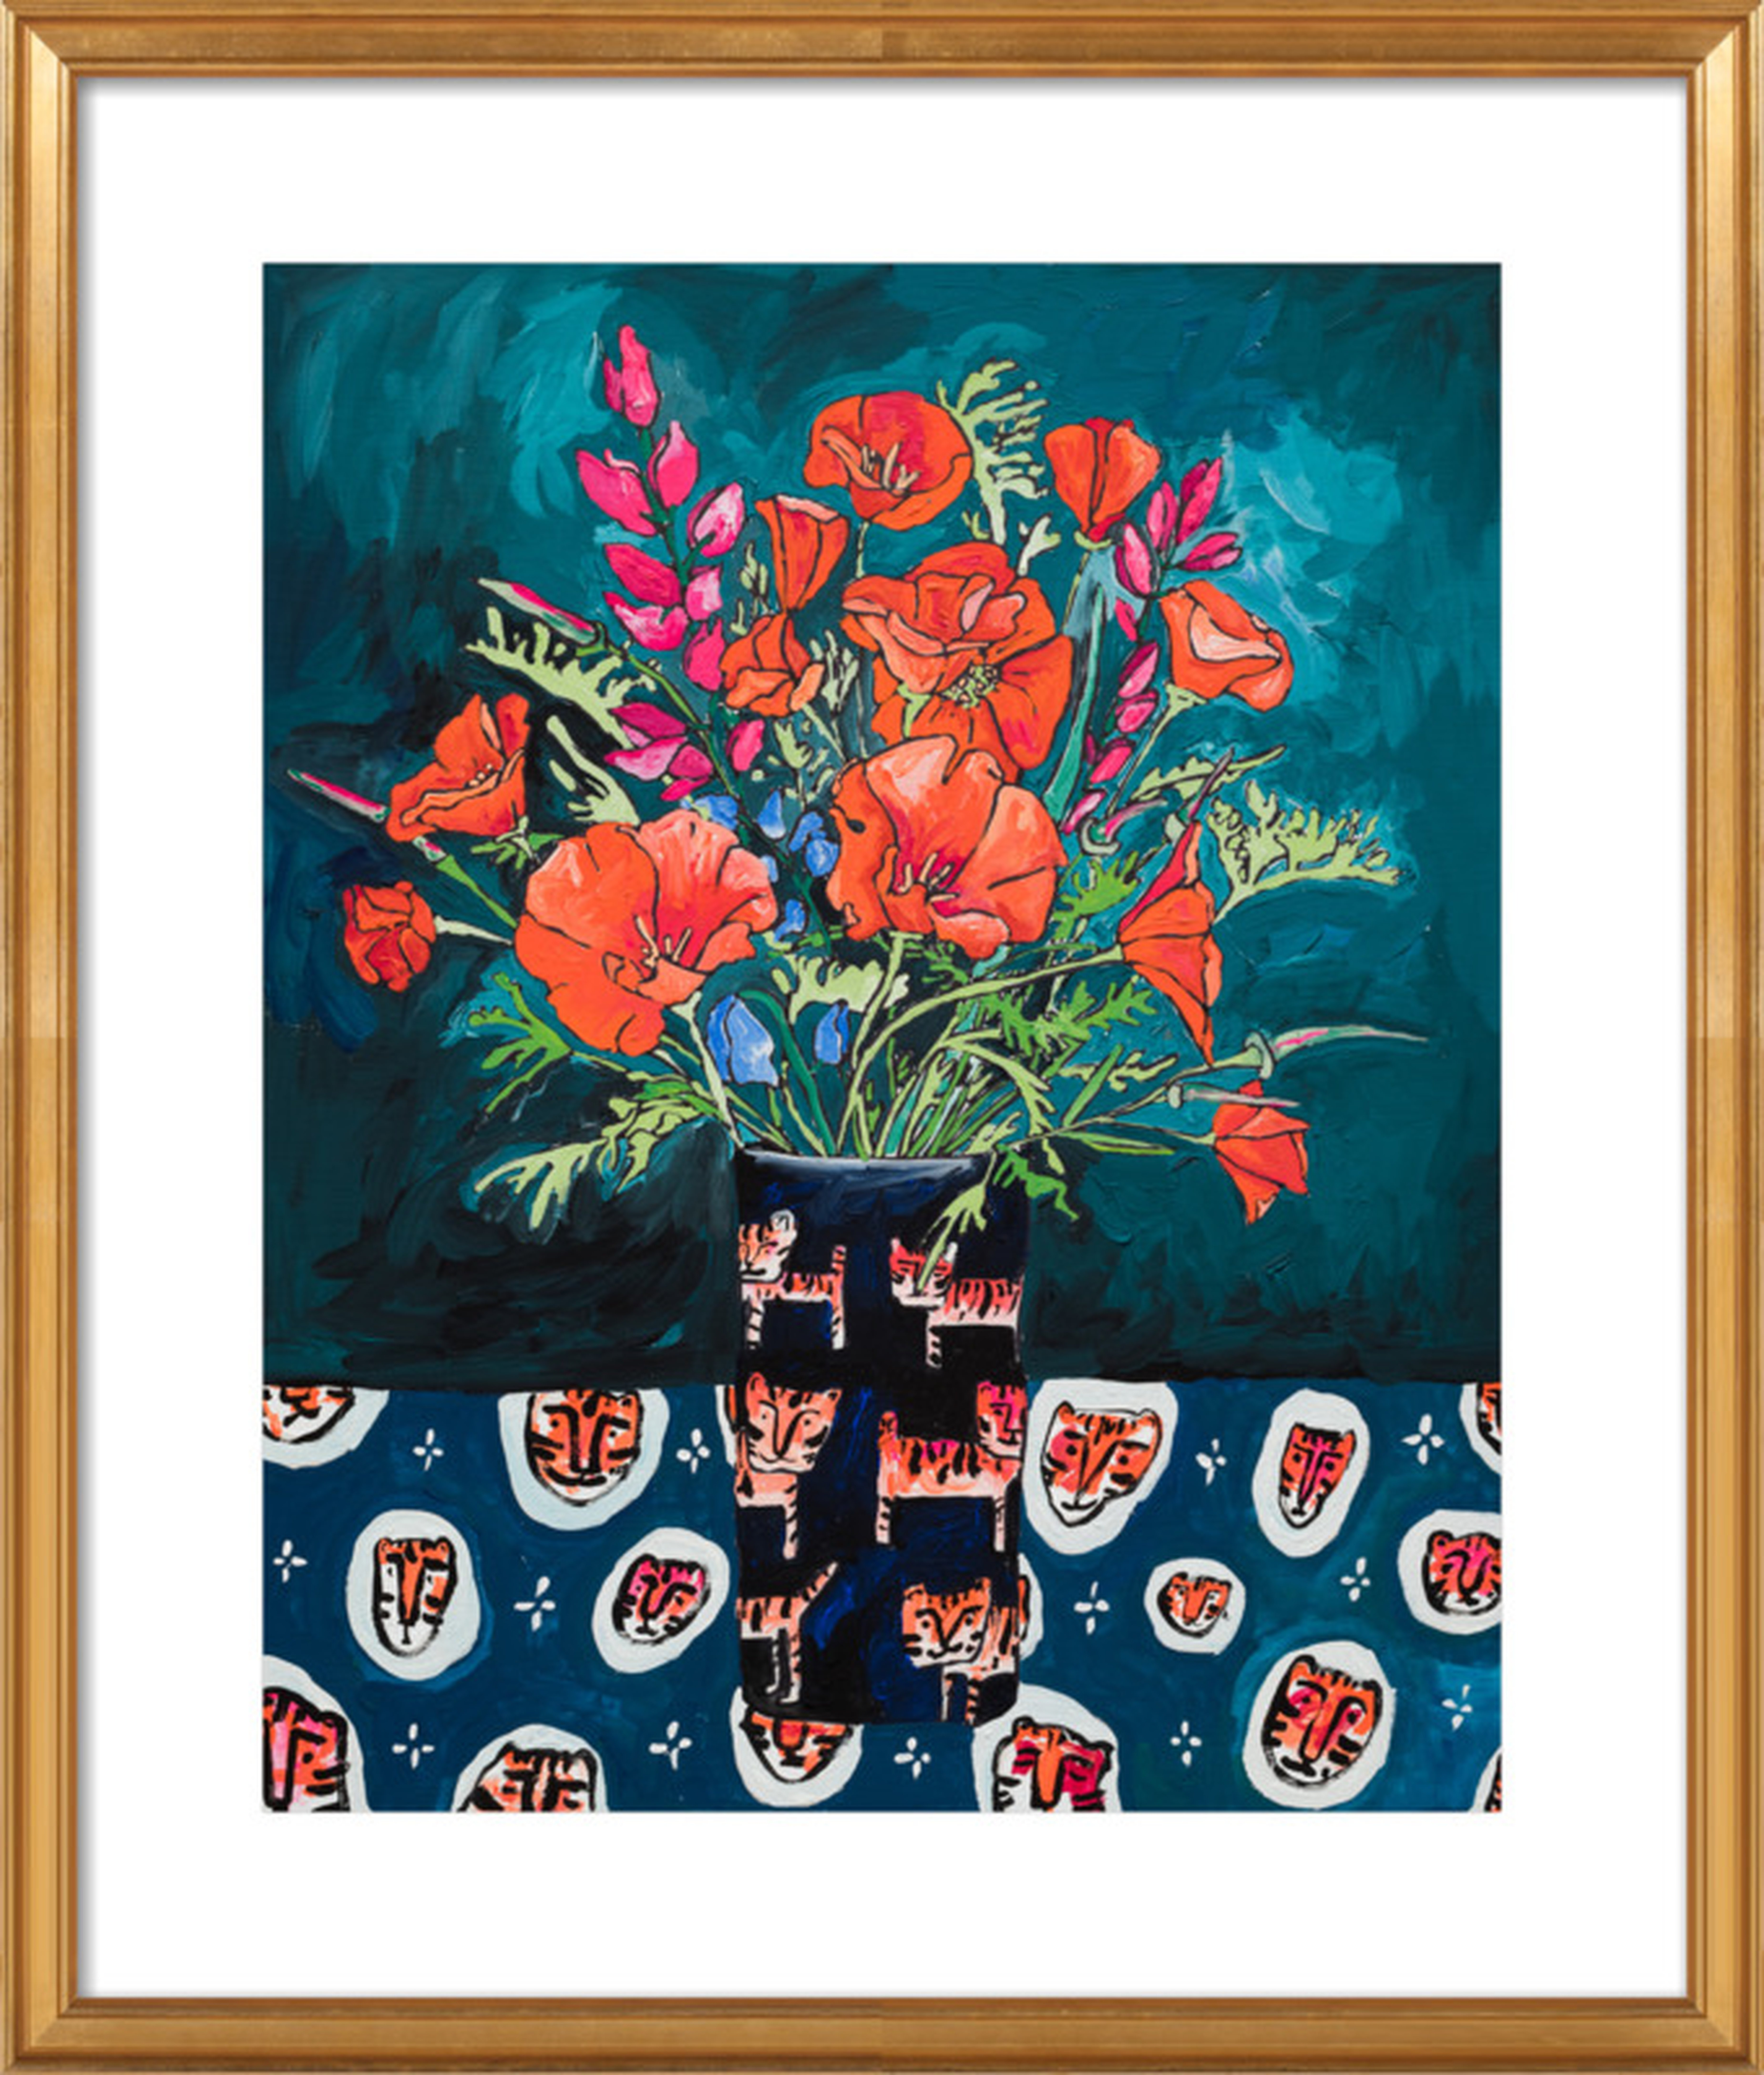 California Poppies and Lupine in Tiger Vase on Emerald Green - Artfully Walls